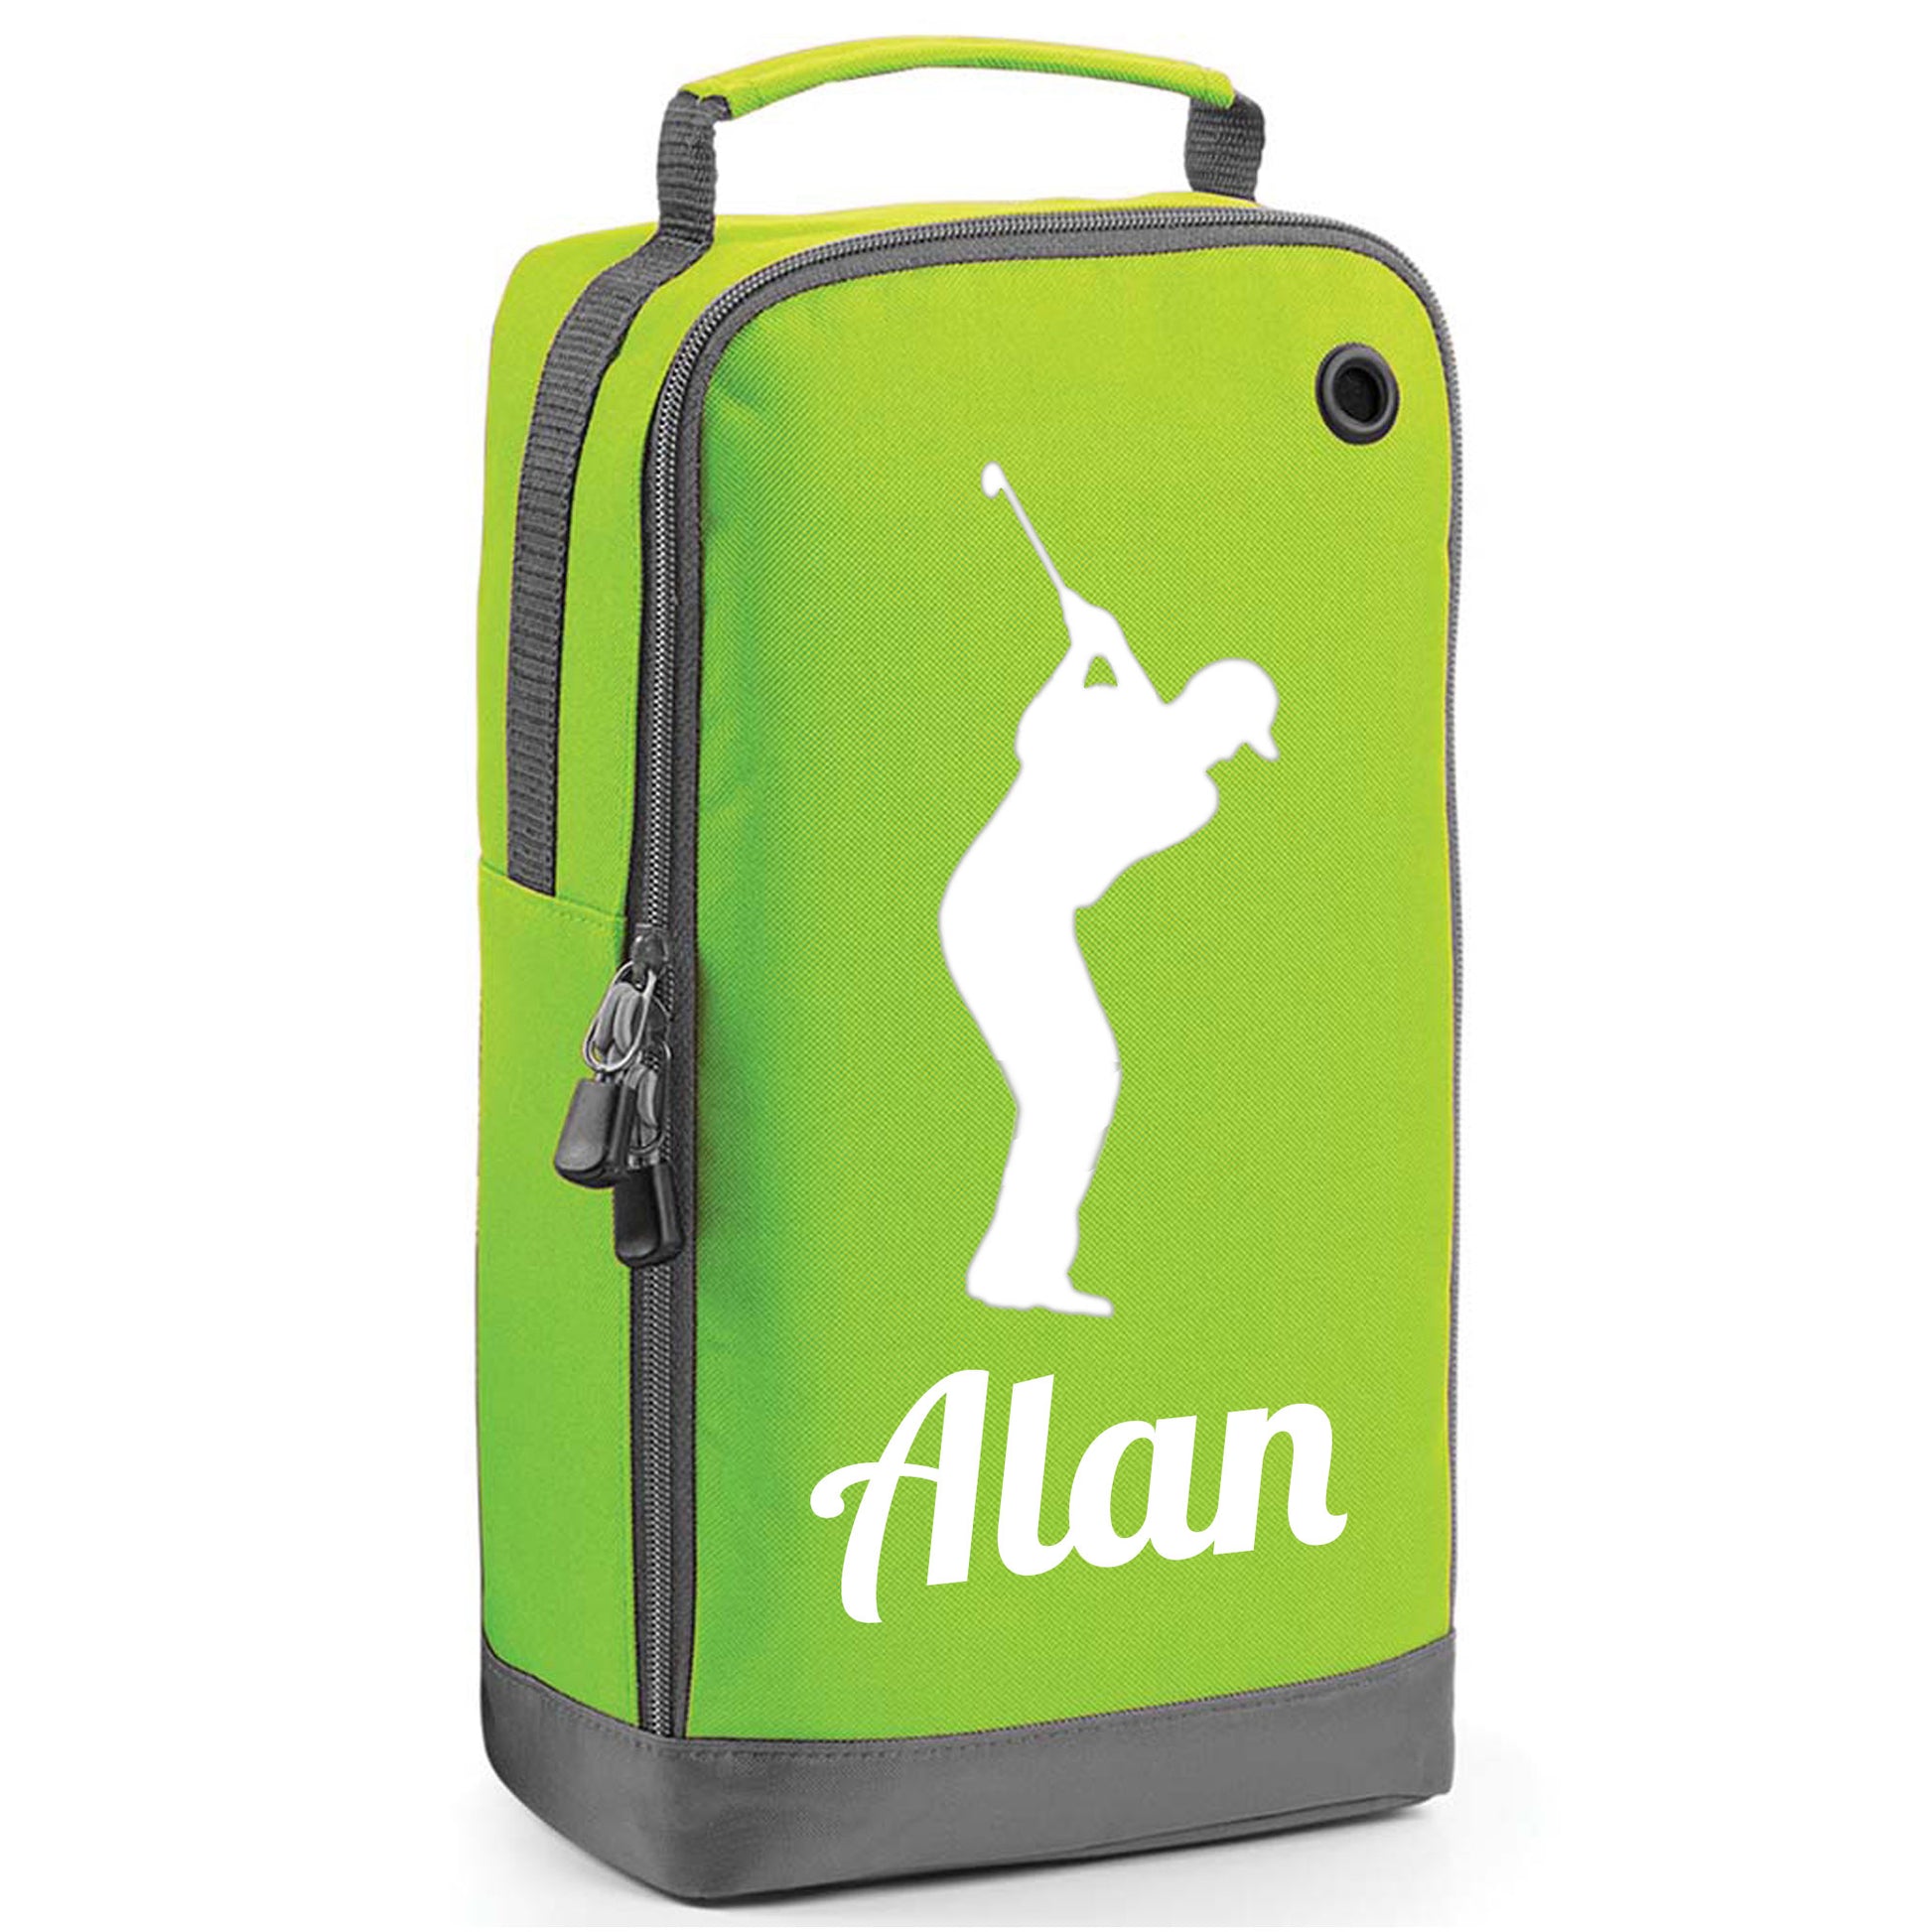 Personalised Golf Shoe Bag with Male Golfer & Name or Initials  - Always Looking Good - Lime Green  